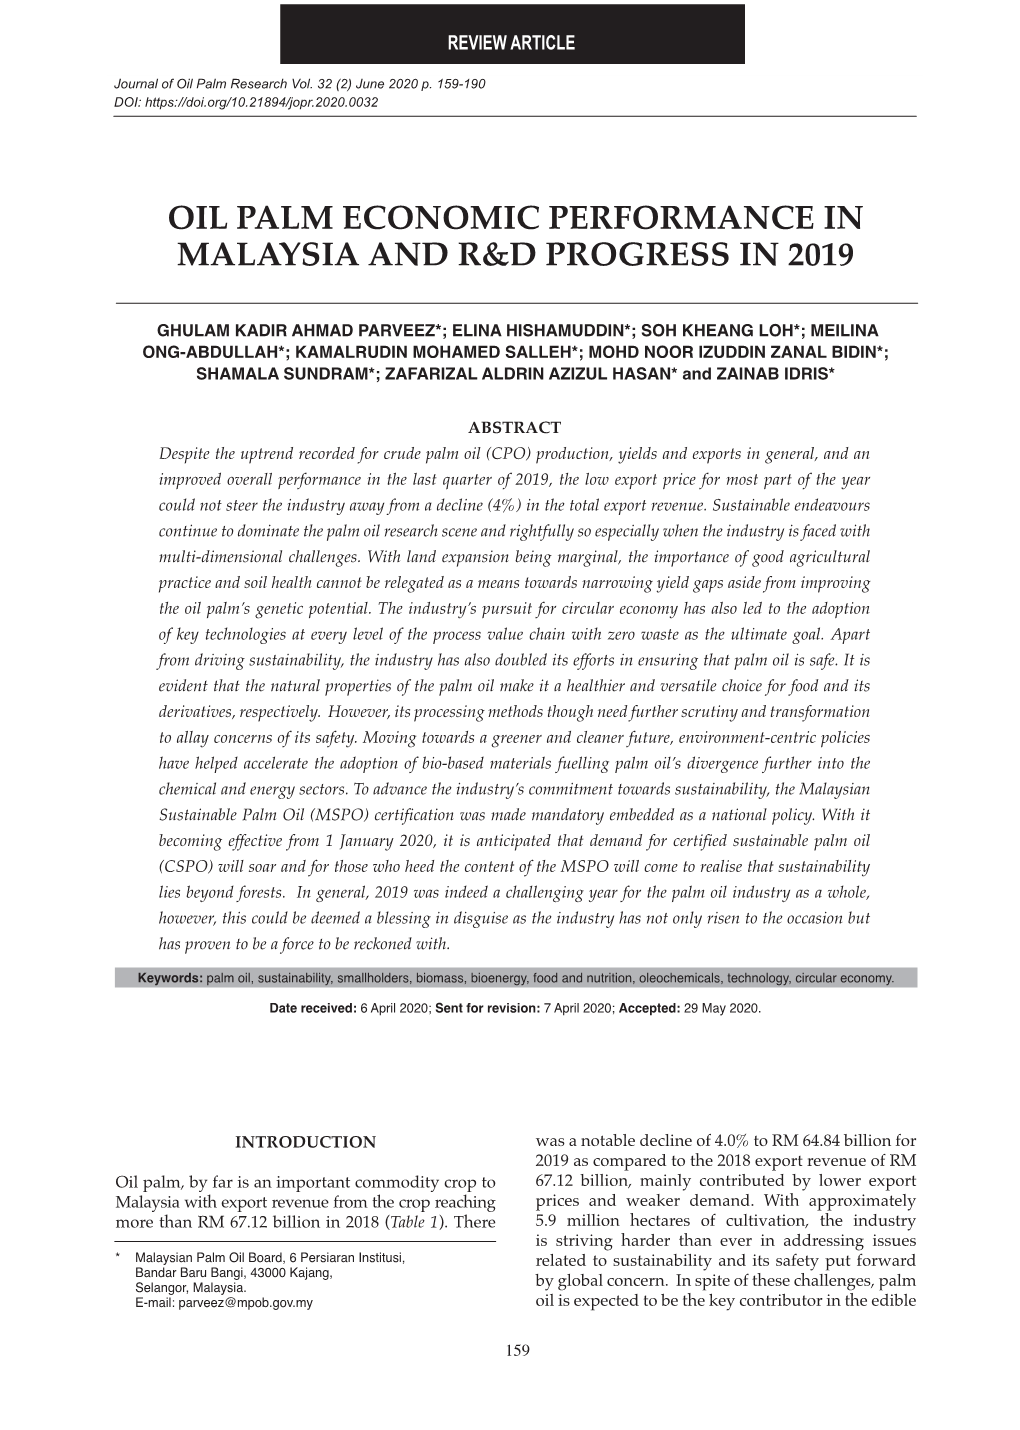 Oil Palm Economic Performance in Malaysia and R&D Progress in 2019